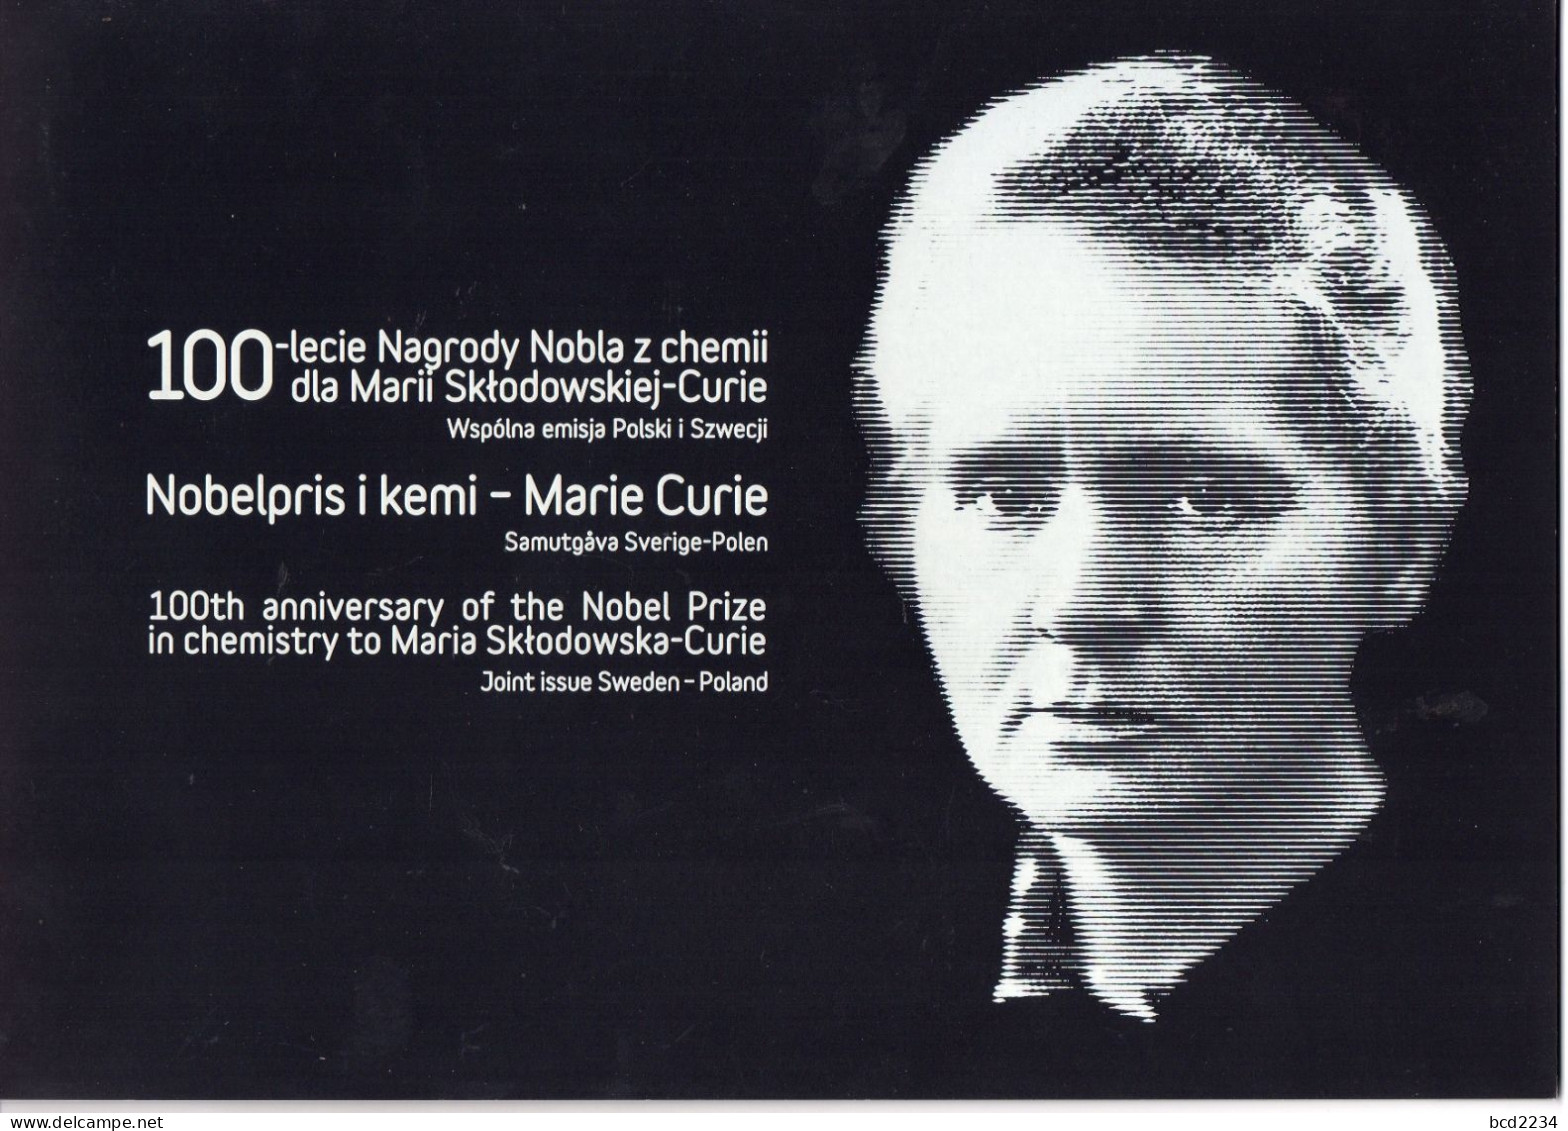 POLAND 2011 LIMITED EDITION: RARE 100TH ANNIVERSARY MARIE CURIE NOBEL PRIZE CHEMISTRY FOLDER FDC MS PL SWEDEN - Emisiones Comunes